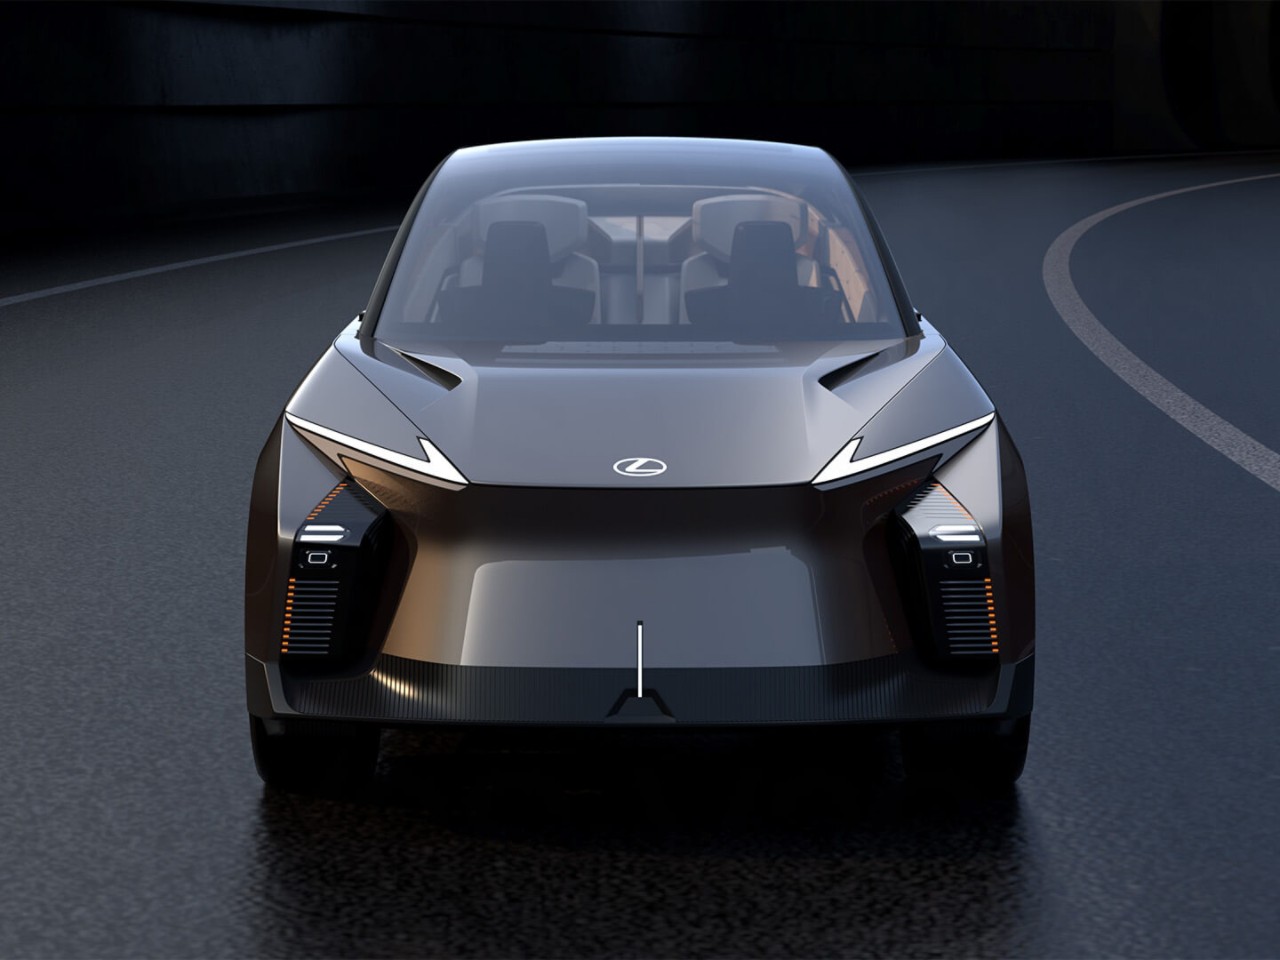 Front view of the Lexus LF-ZL Concept Vehicle